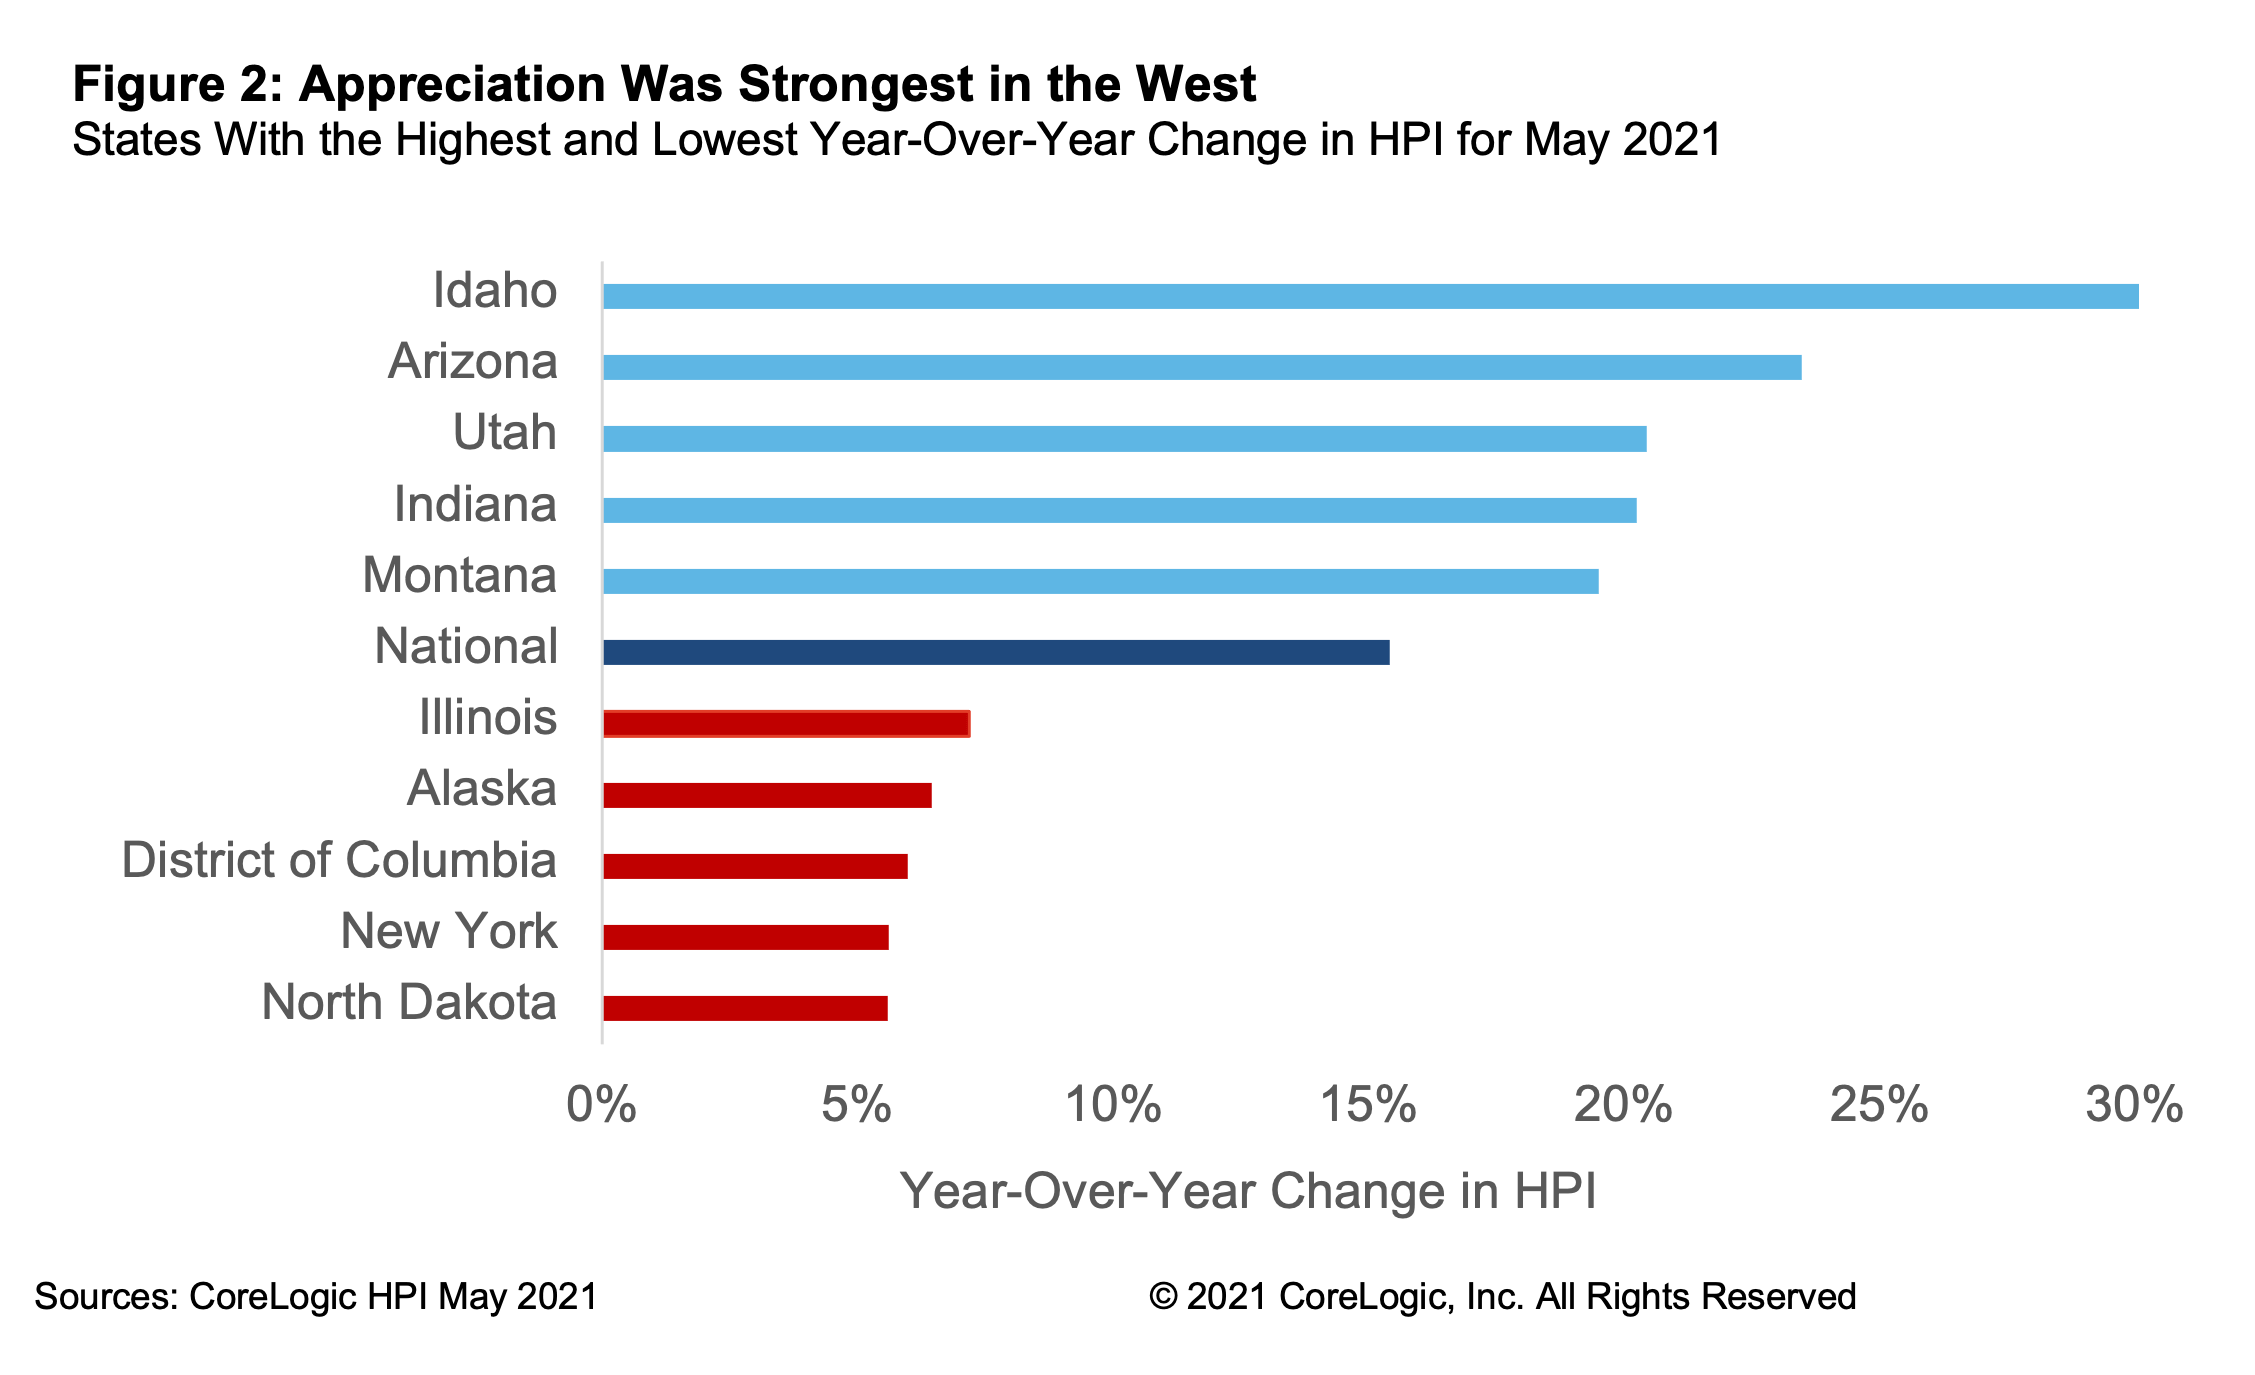 Figure 2: Appreciation was strongest in the West. States with the highest and lowest year-over-year change in HPI for May 2021